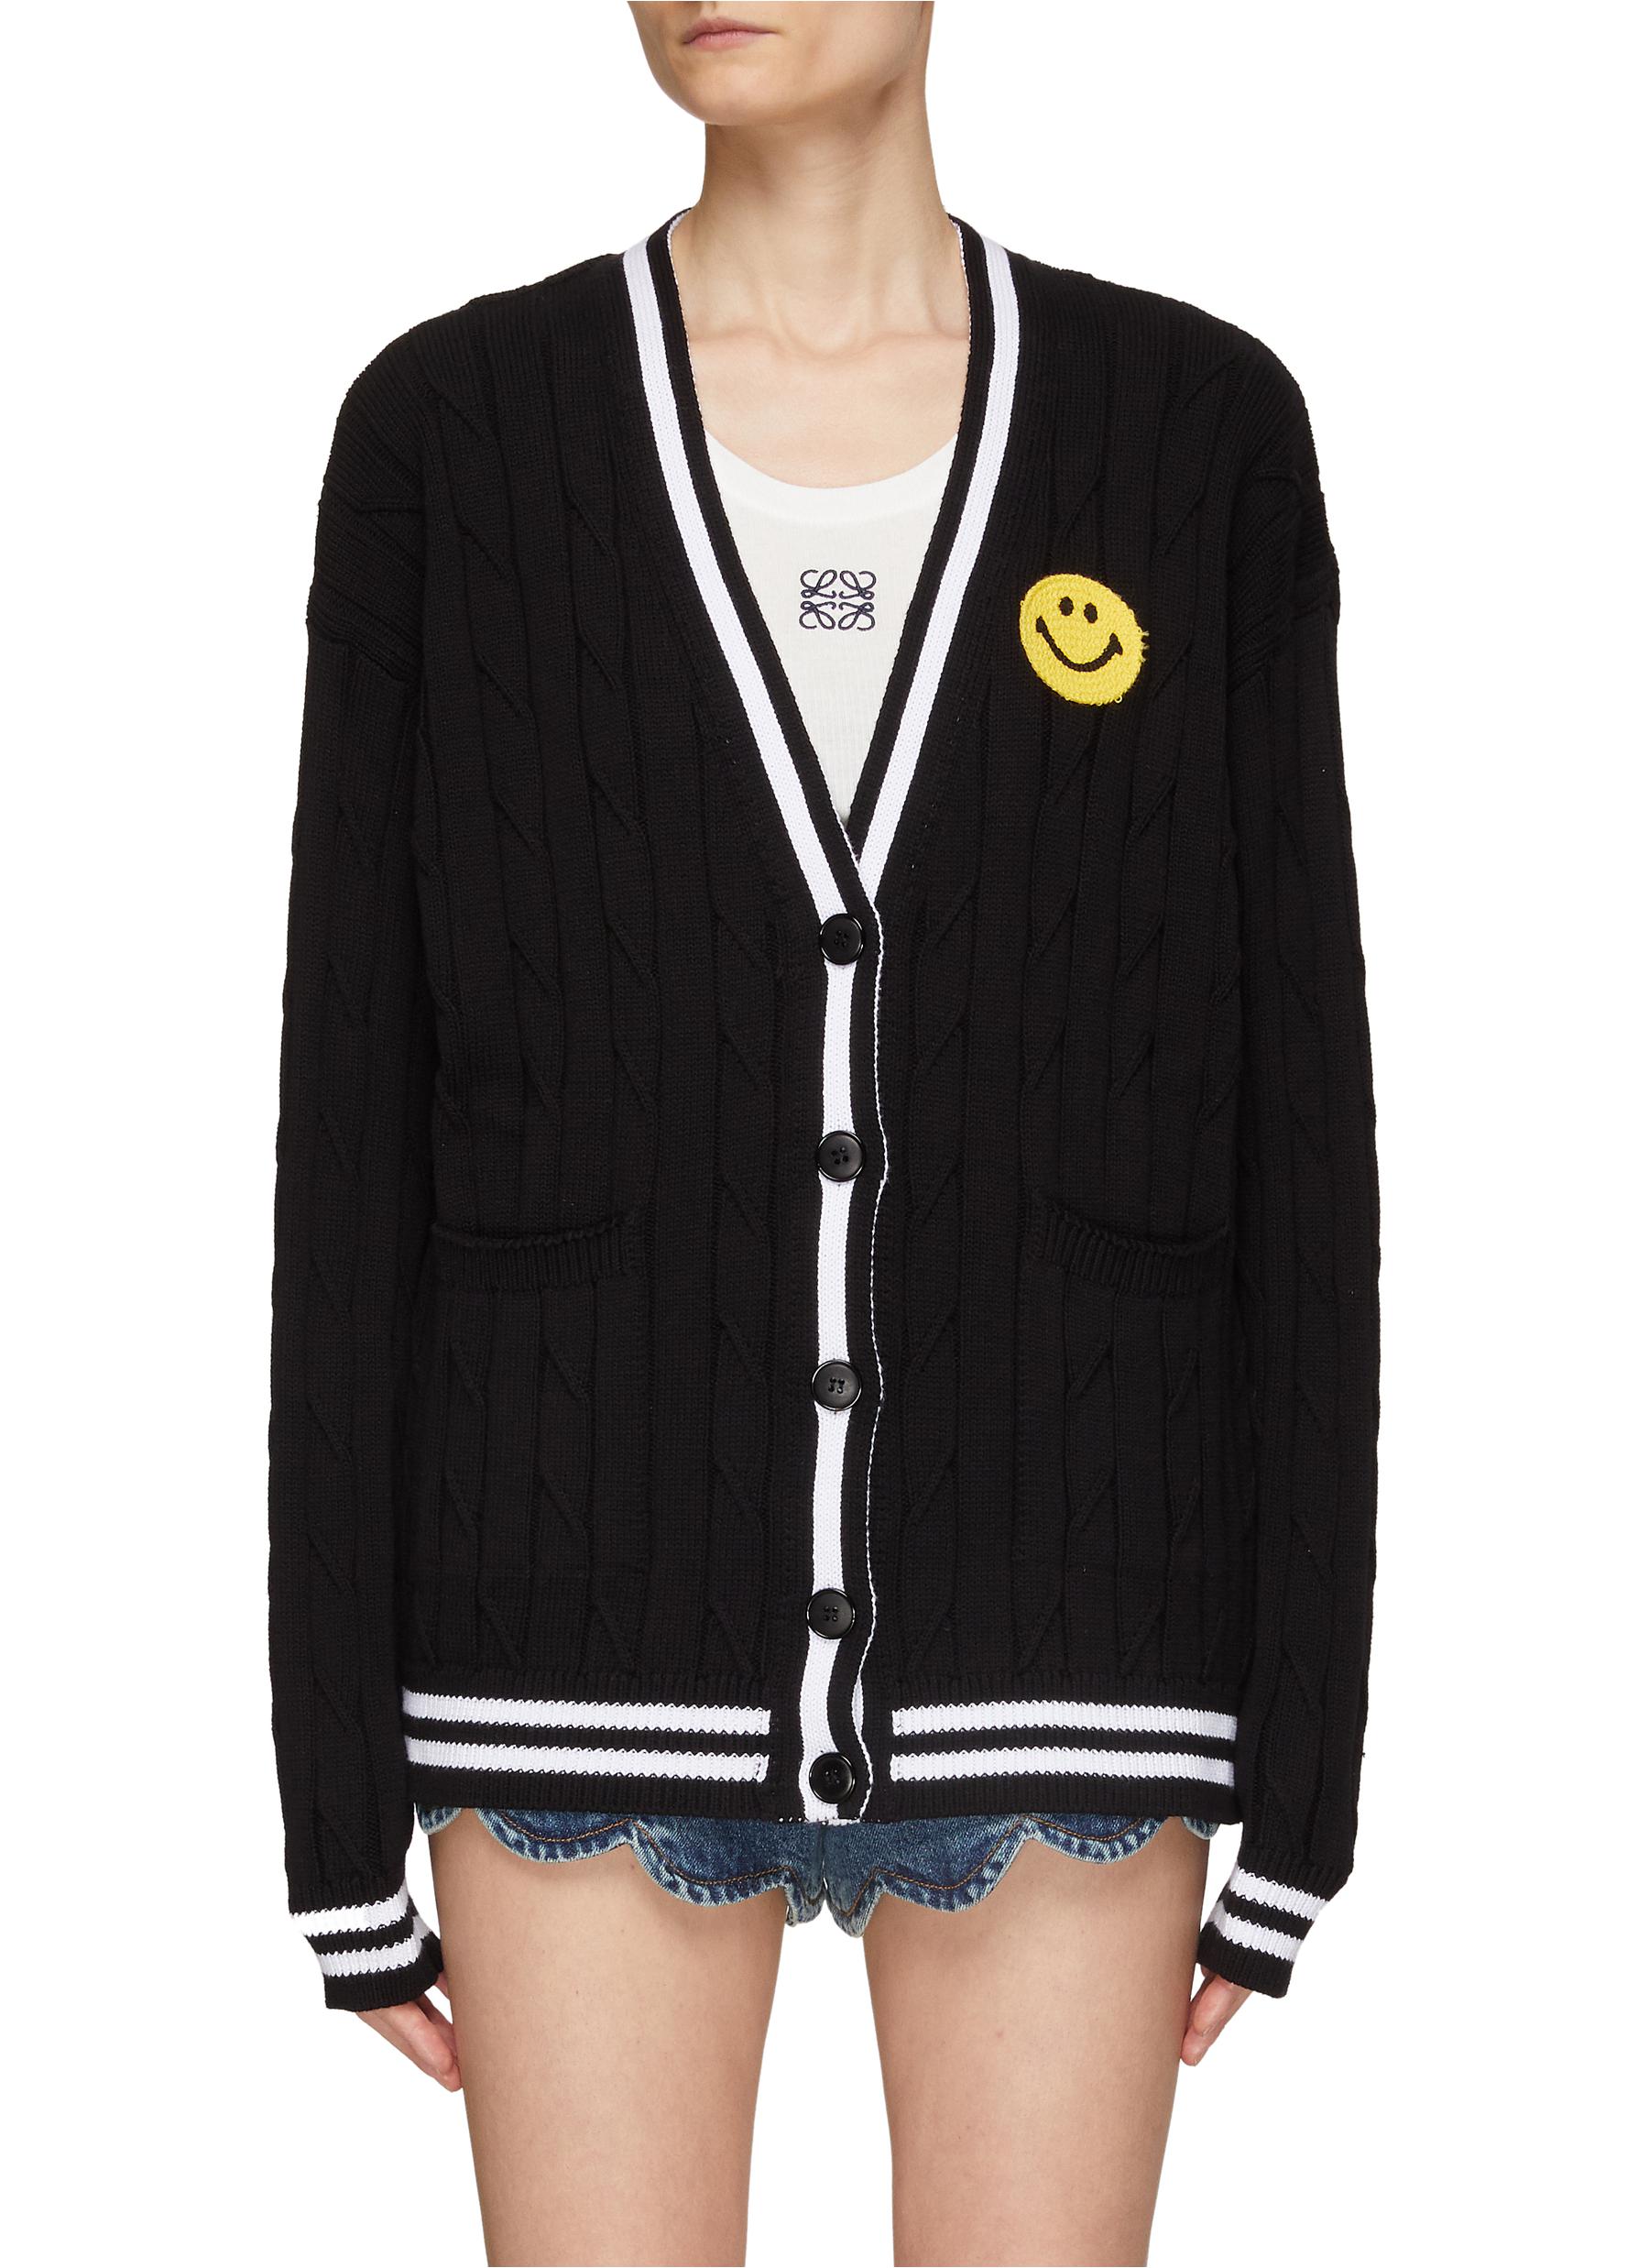 JOSHUA'S Crocheted Smiley Face Striped Trim Cotton Knit Cardigan